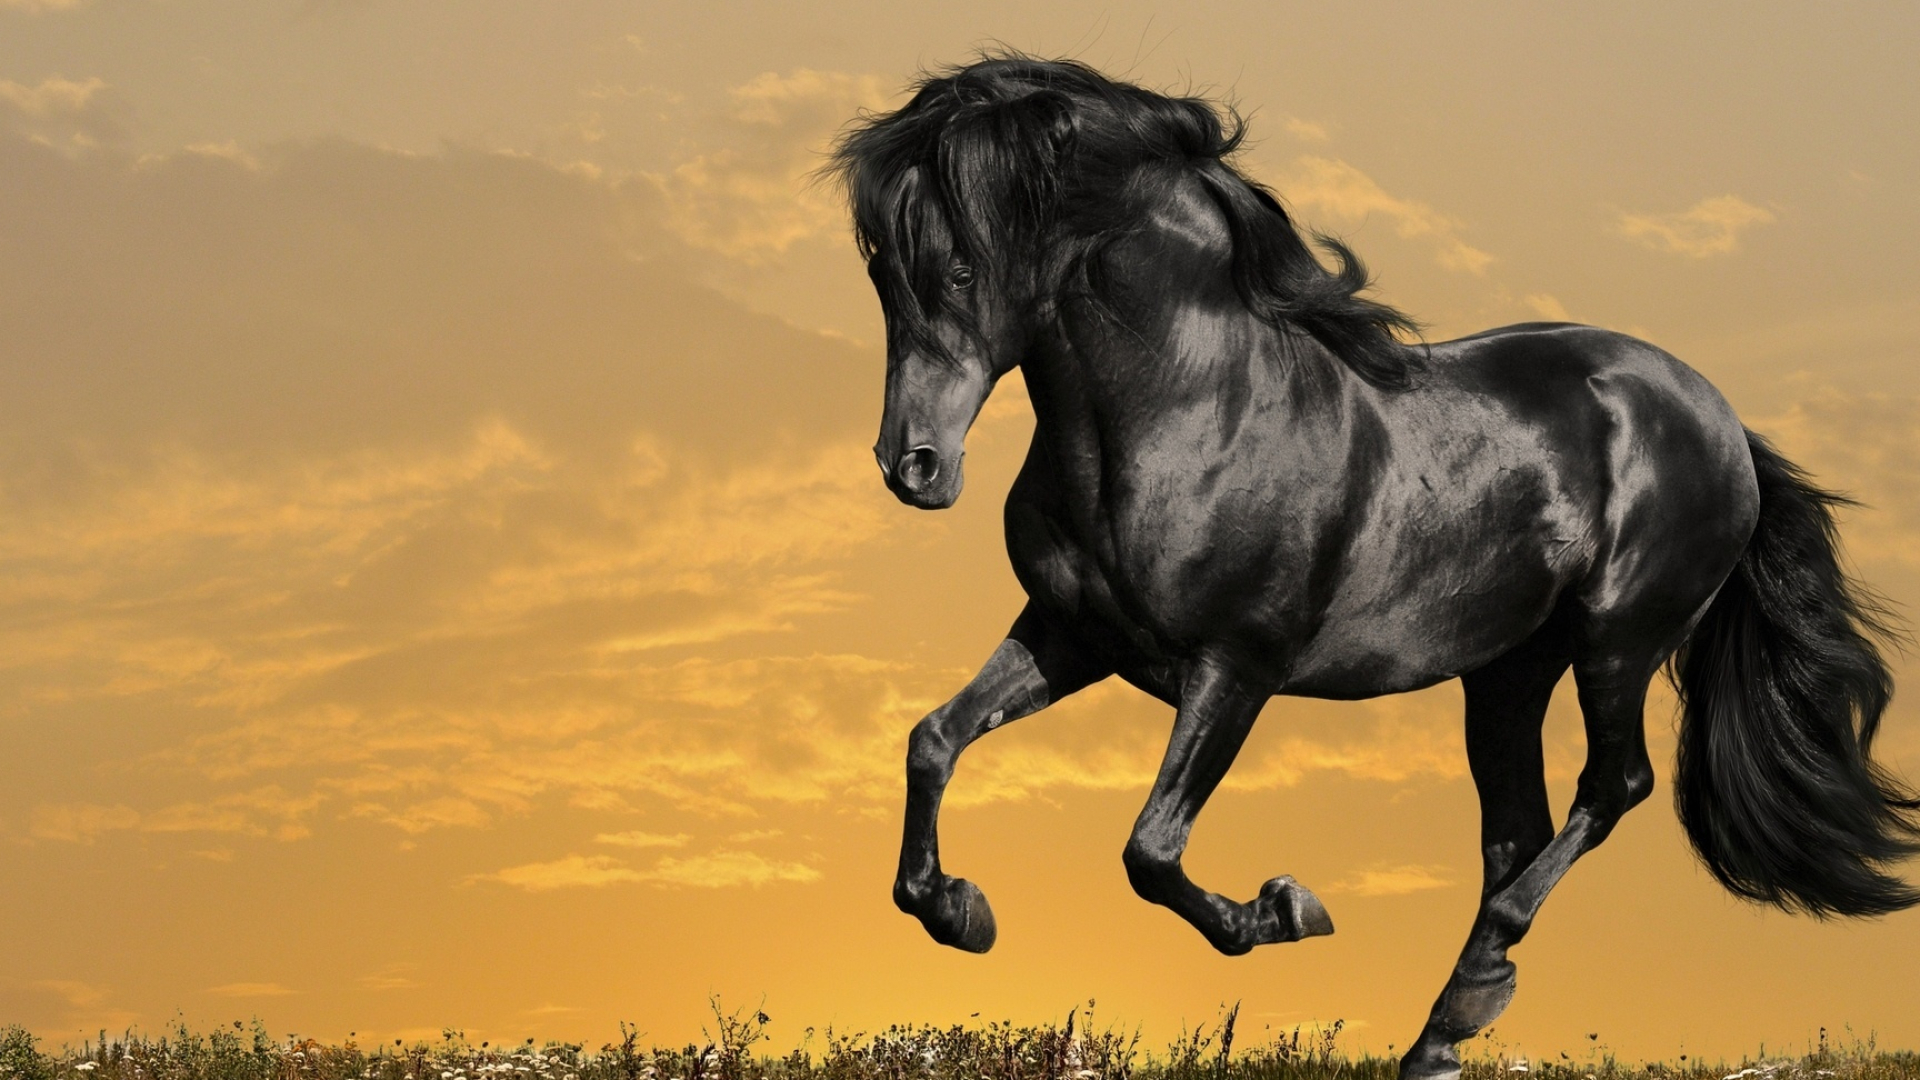 Horse: Mustang, Hardy naturalized horses of U.S. western plains. 1920x1080 Full HD Wallpaper.